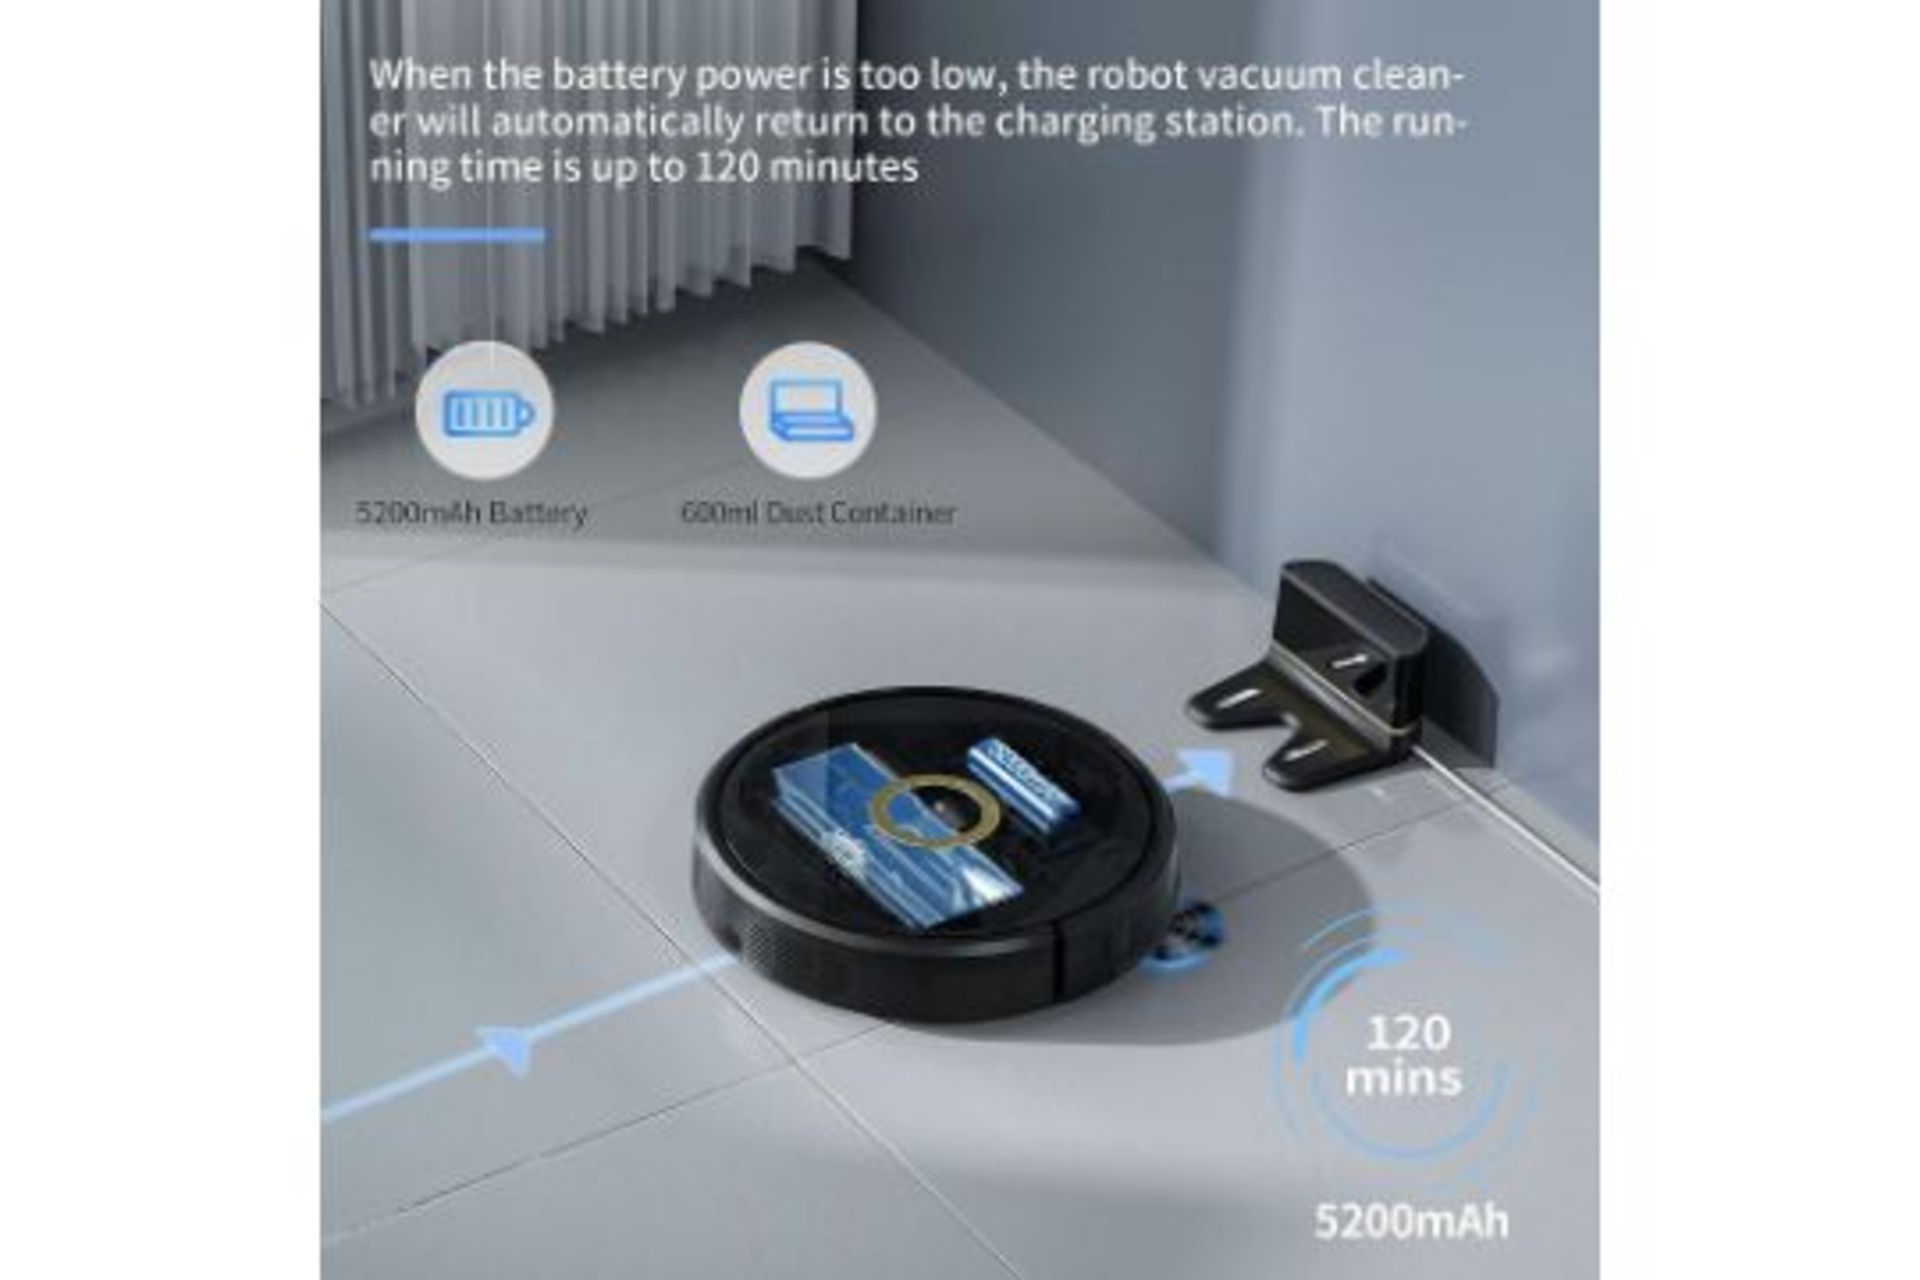 New & Boxed Robot Vacuum Cleaner Lucy with 3D-SLAM Navigation. RRP £369.99. 4000Pa Suction, No- - Image 2 of 2